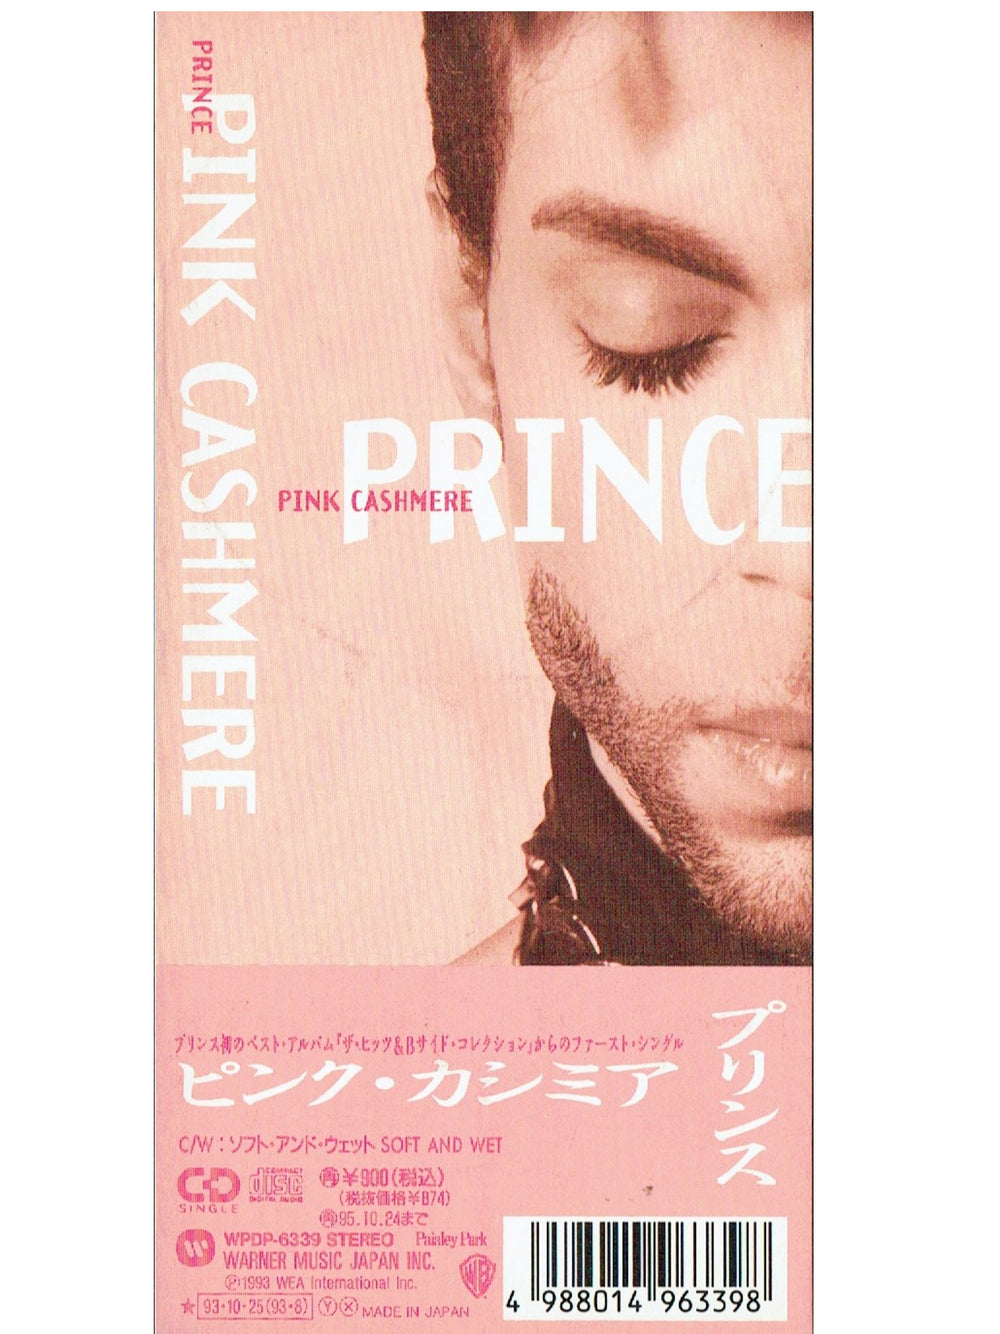 Prince – Pink Cashmere Soft And Wet Original Japan 3 Inch CD Single Release